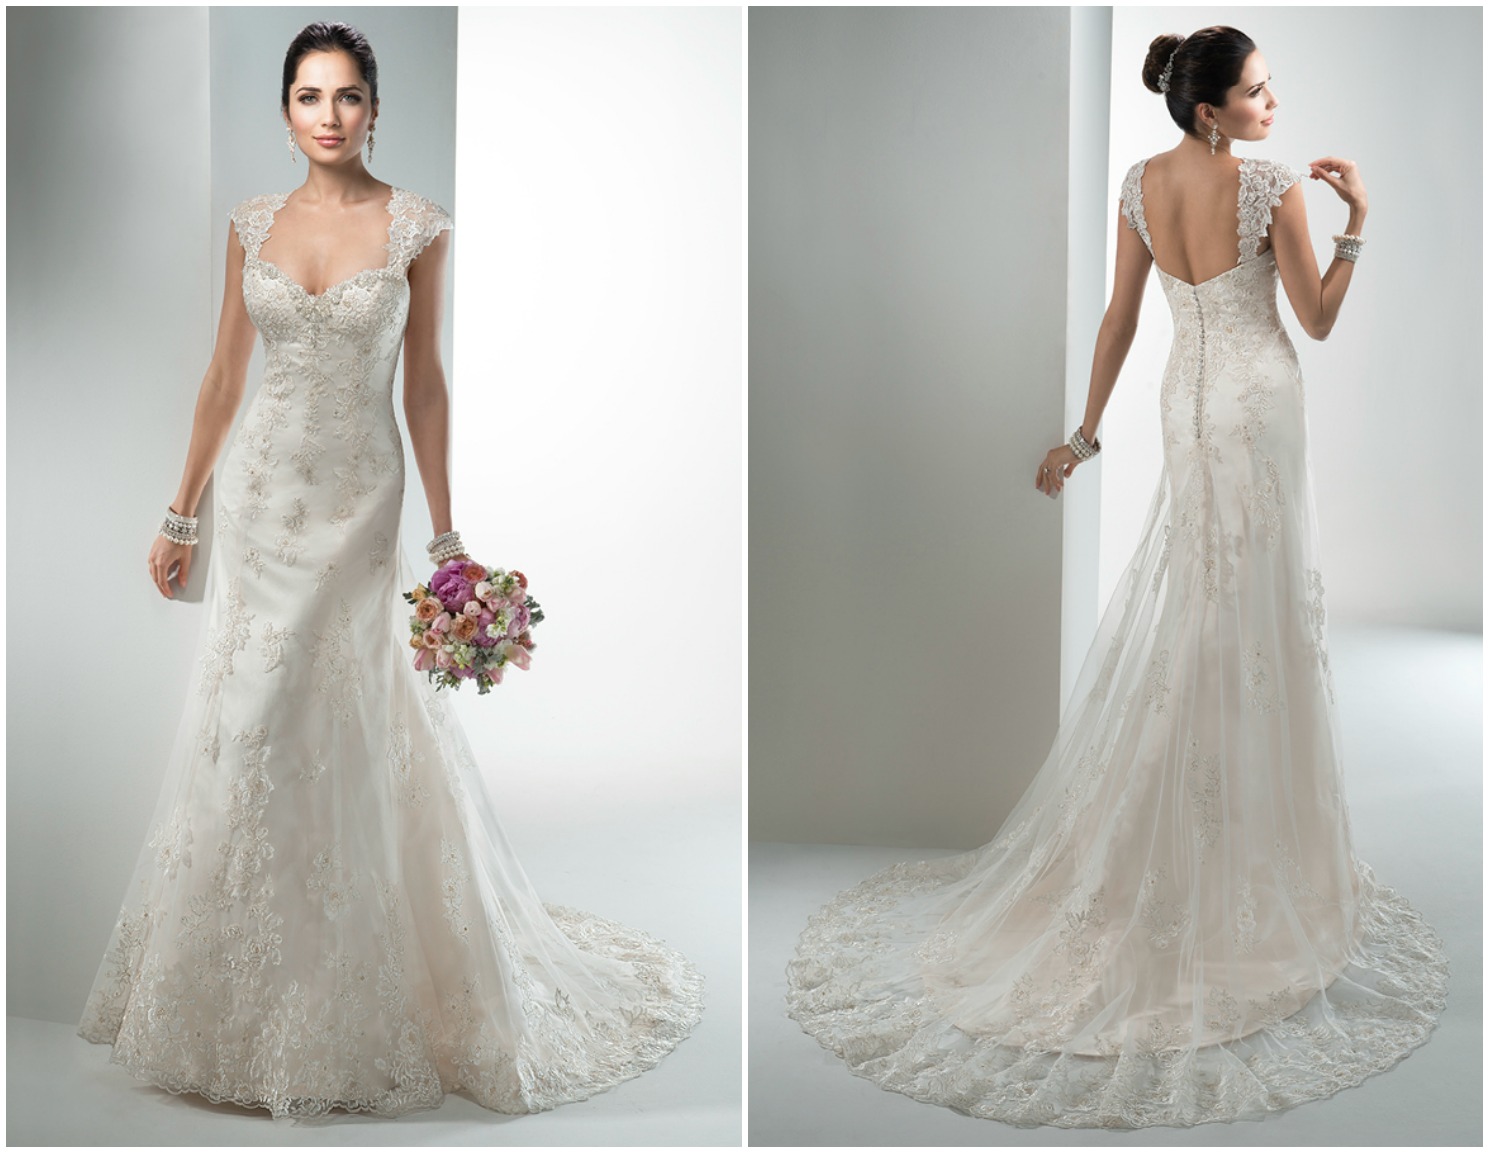 <a href="http://www.maggiesottero.com/dress.aspx?style=4MC025" target="_blank">Maggie Sottero</a>